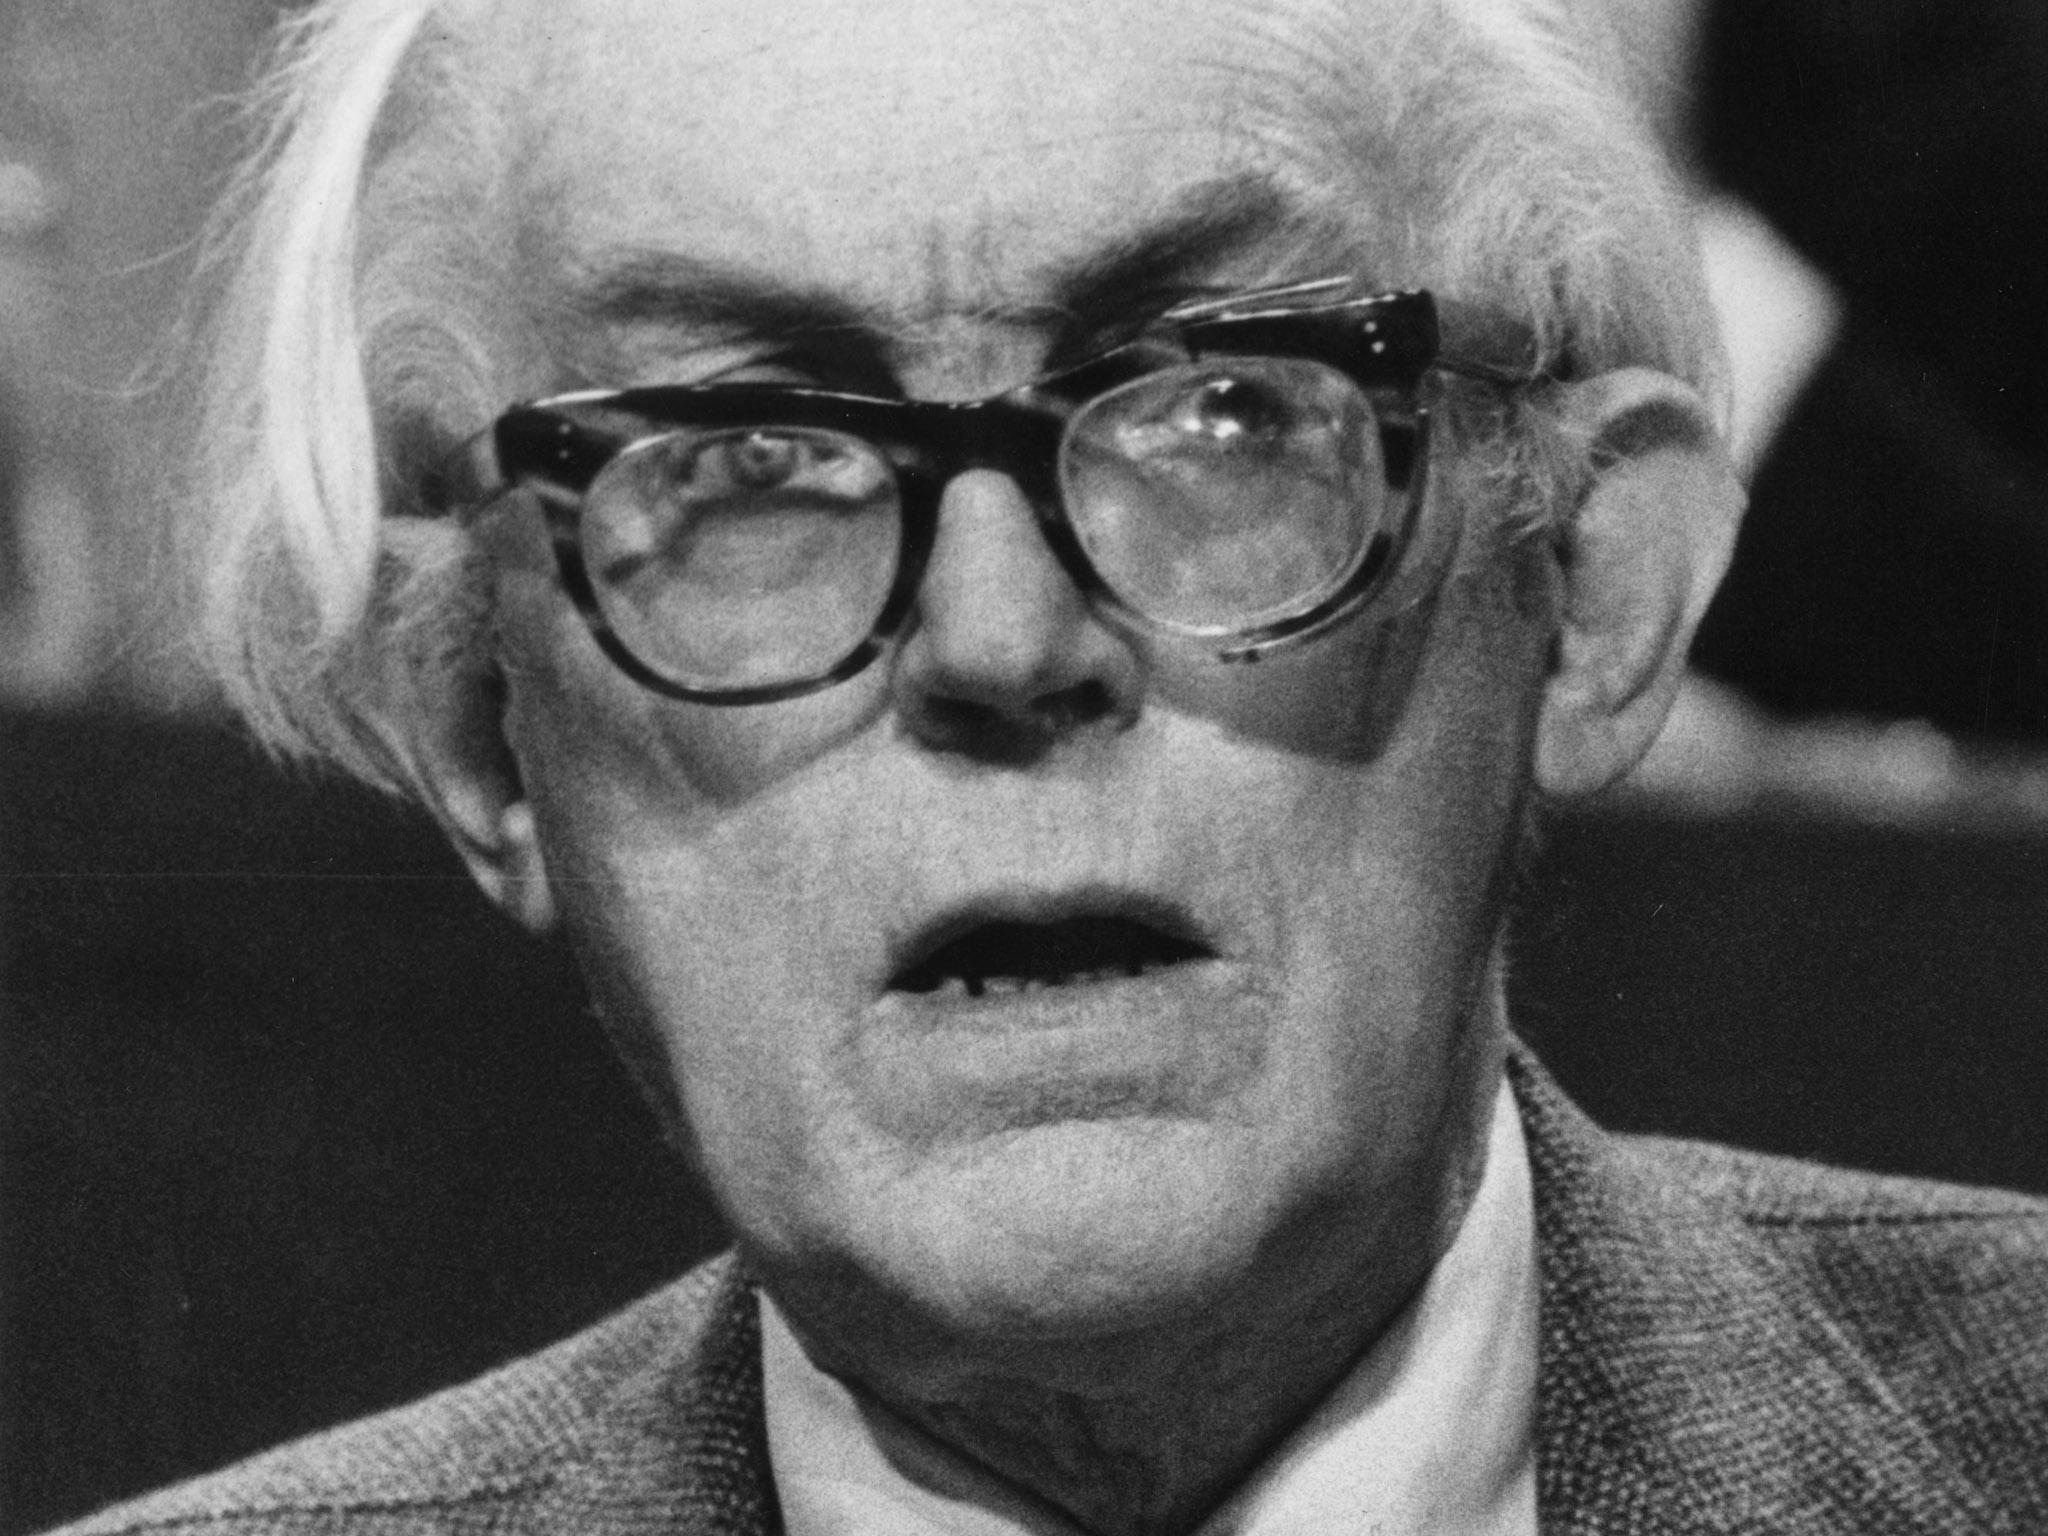 Michael Foot sued The Sunday Times over claims he was a KGB agent and got a new kitchen out of the damages